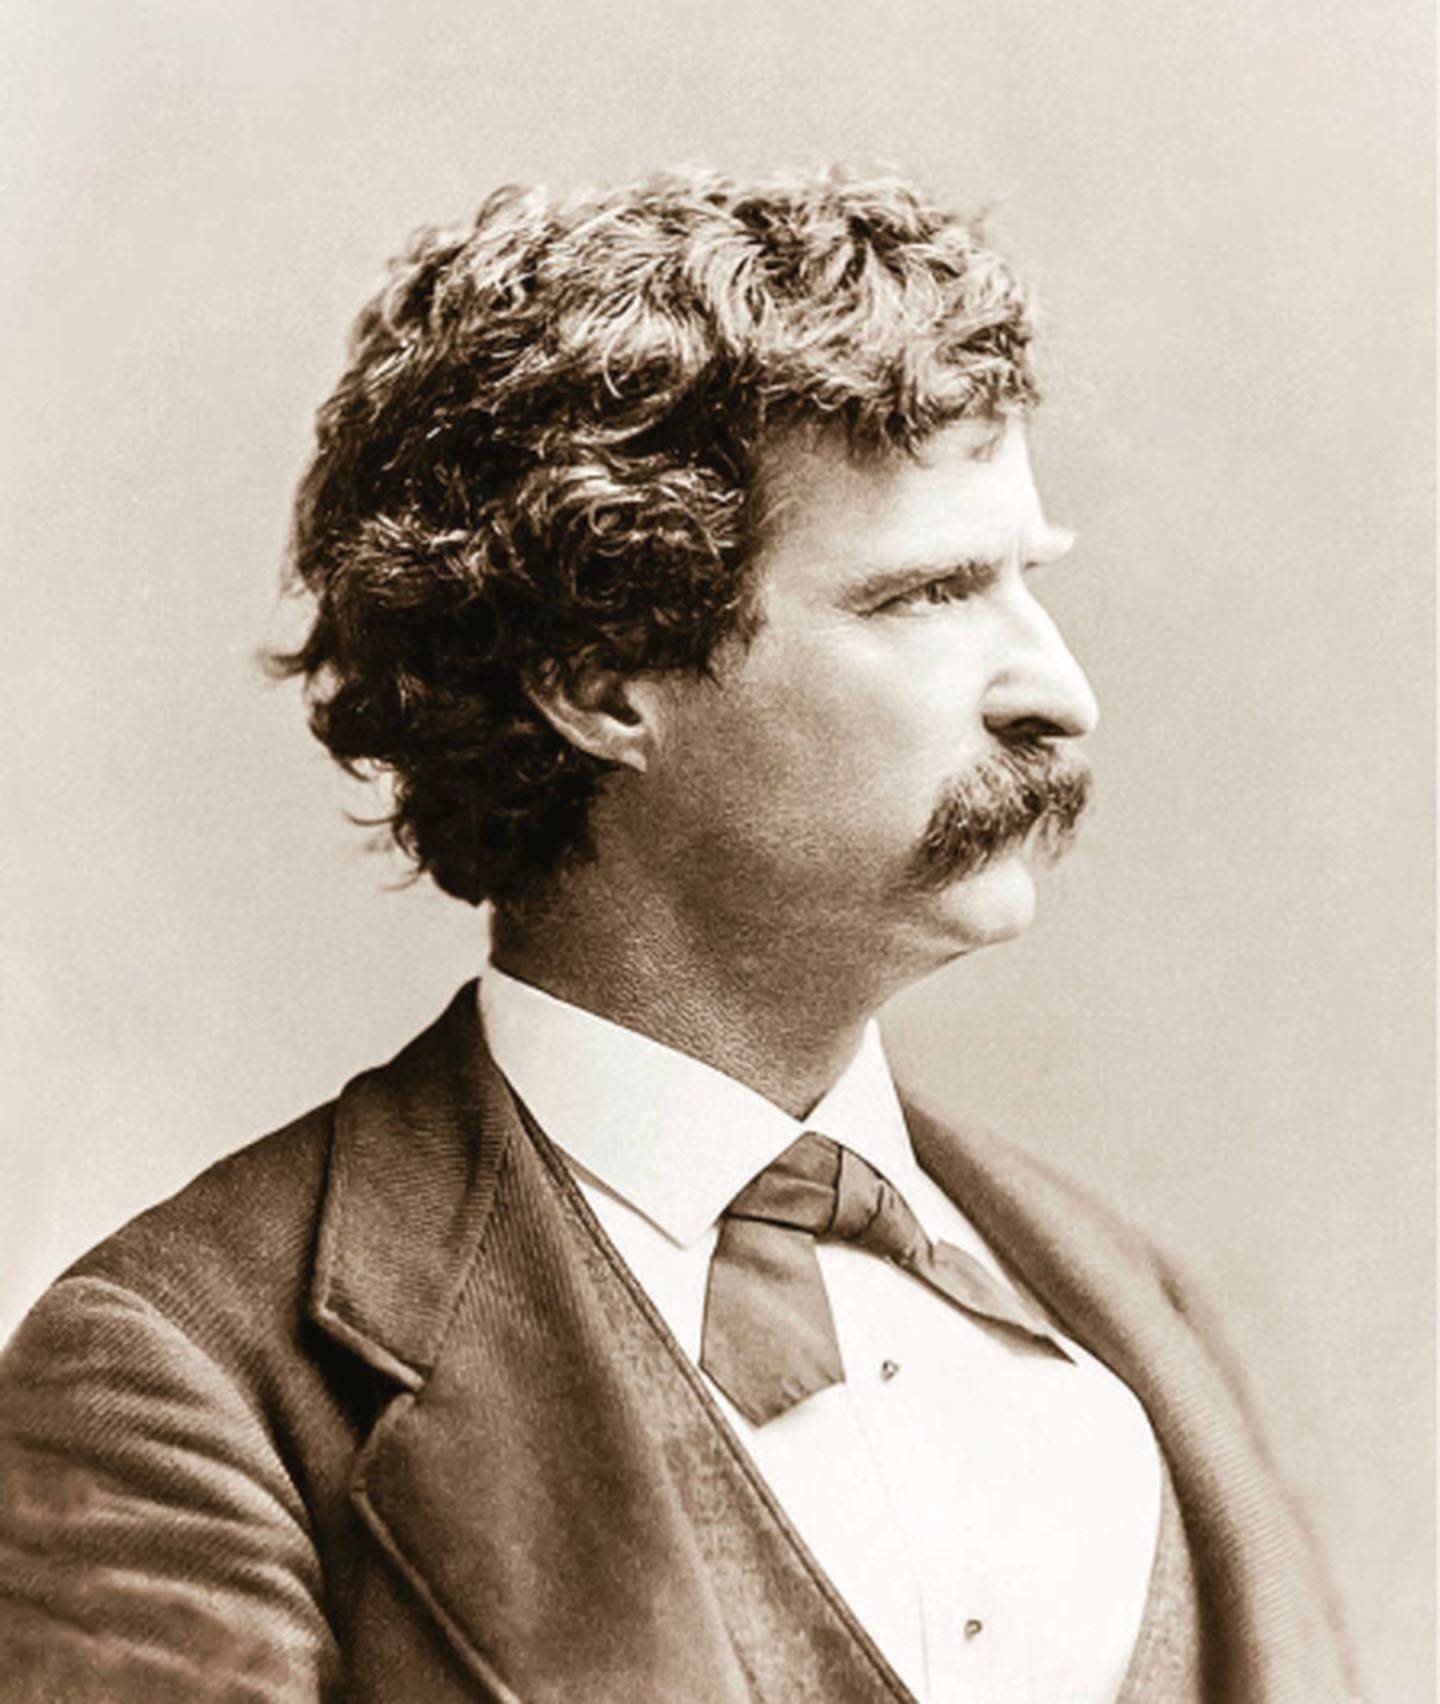 A photo of Mark Twain taken around the time of the lecture.